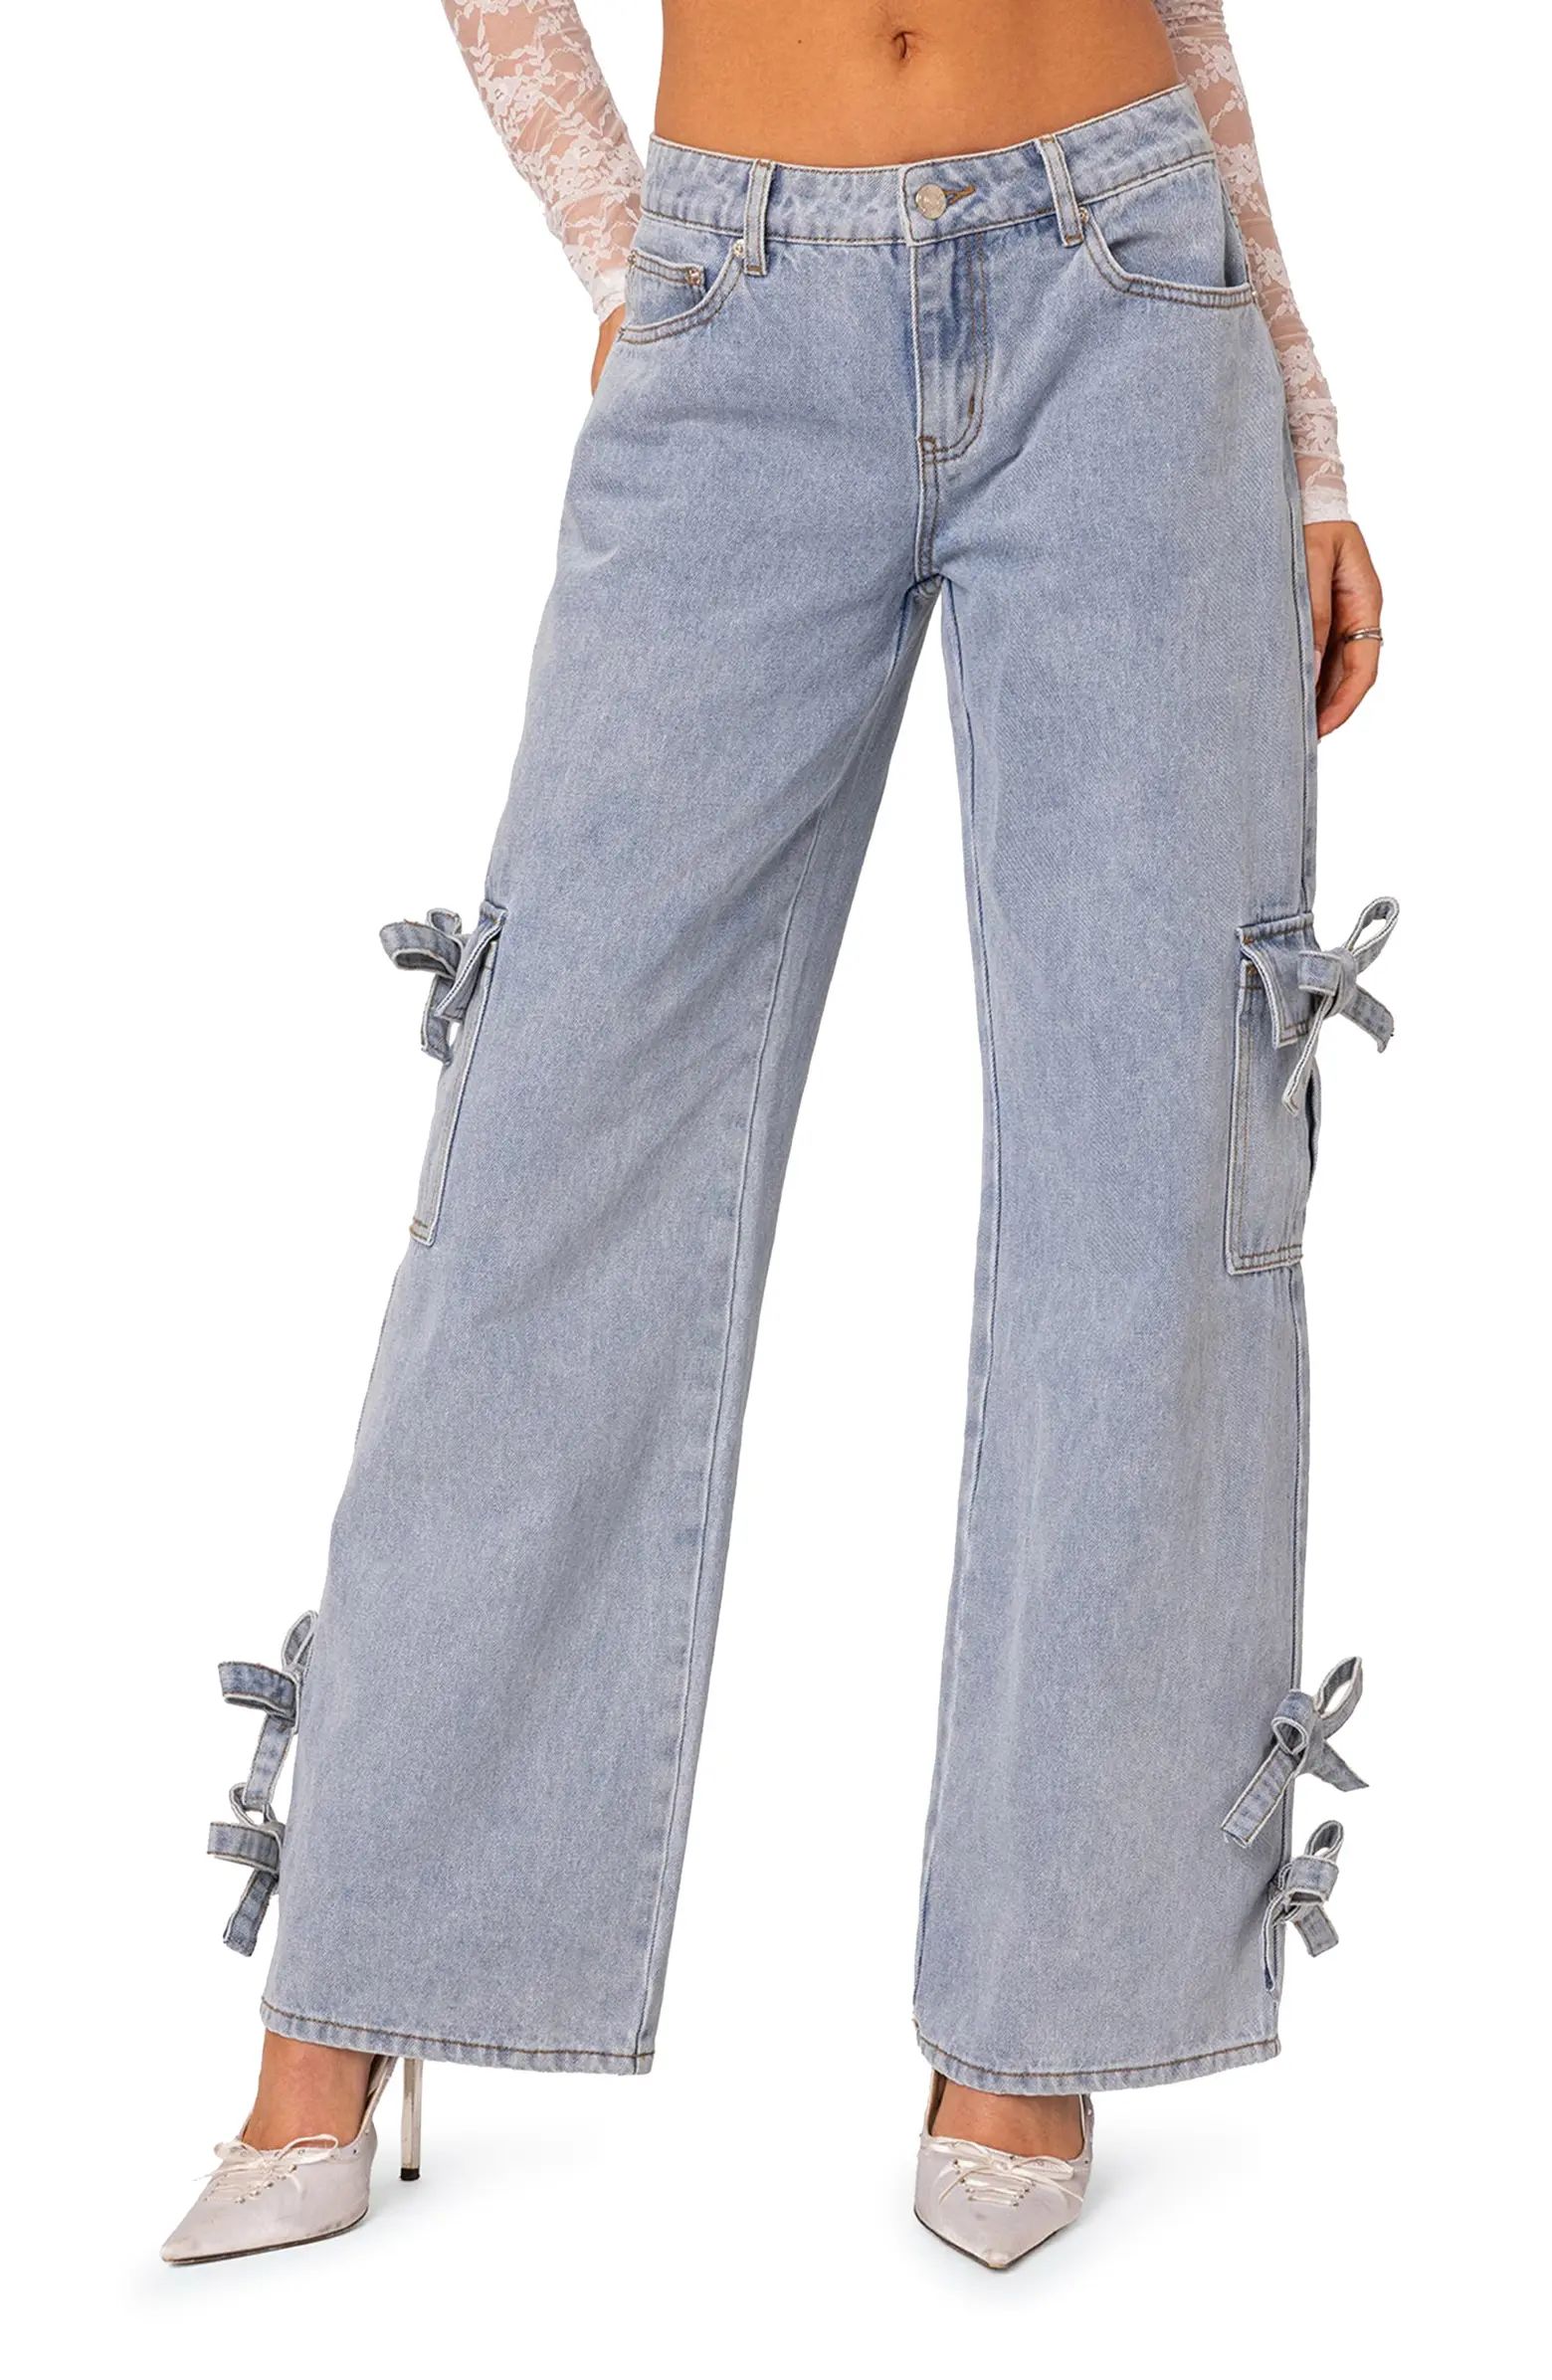 EDIKTED Bows 4 Days Low Rise Wide Leg Cargo Jeans | Nordstrom | Nordstrom